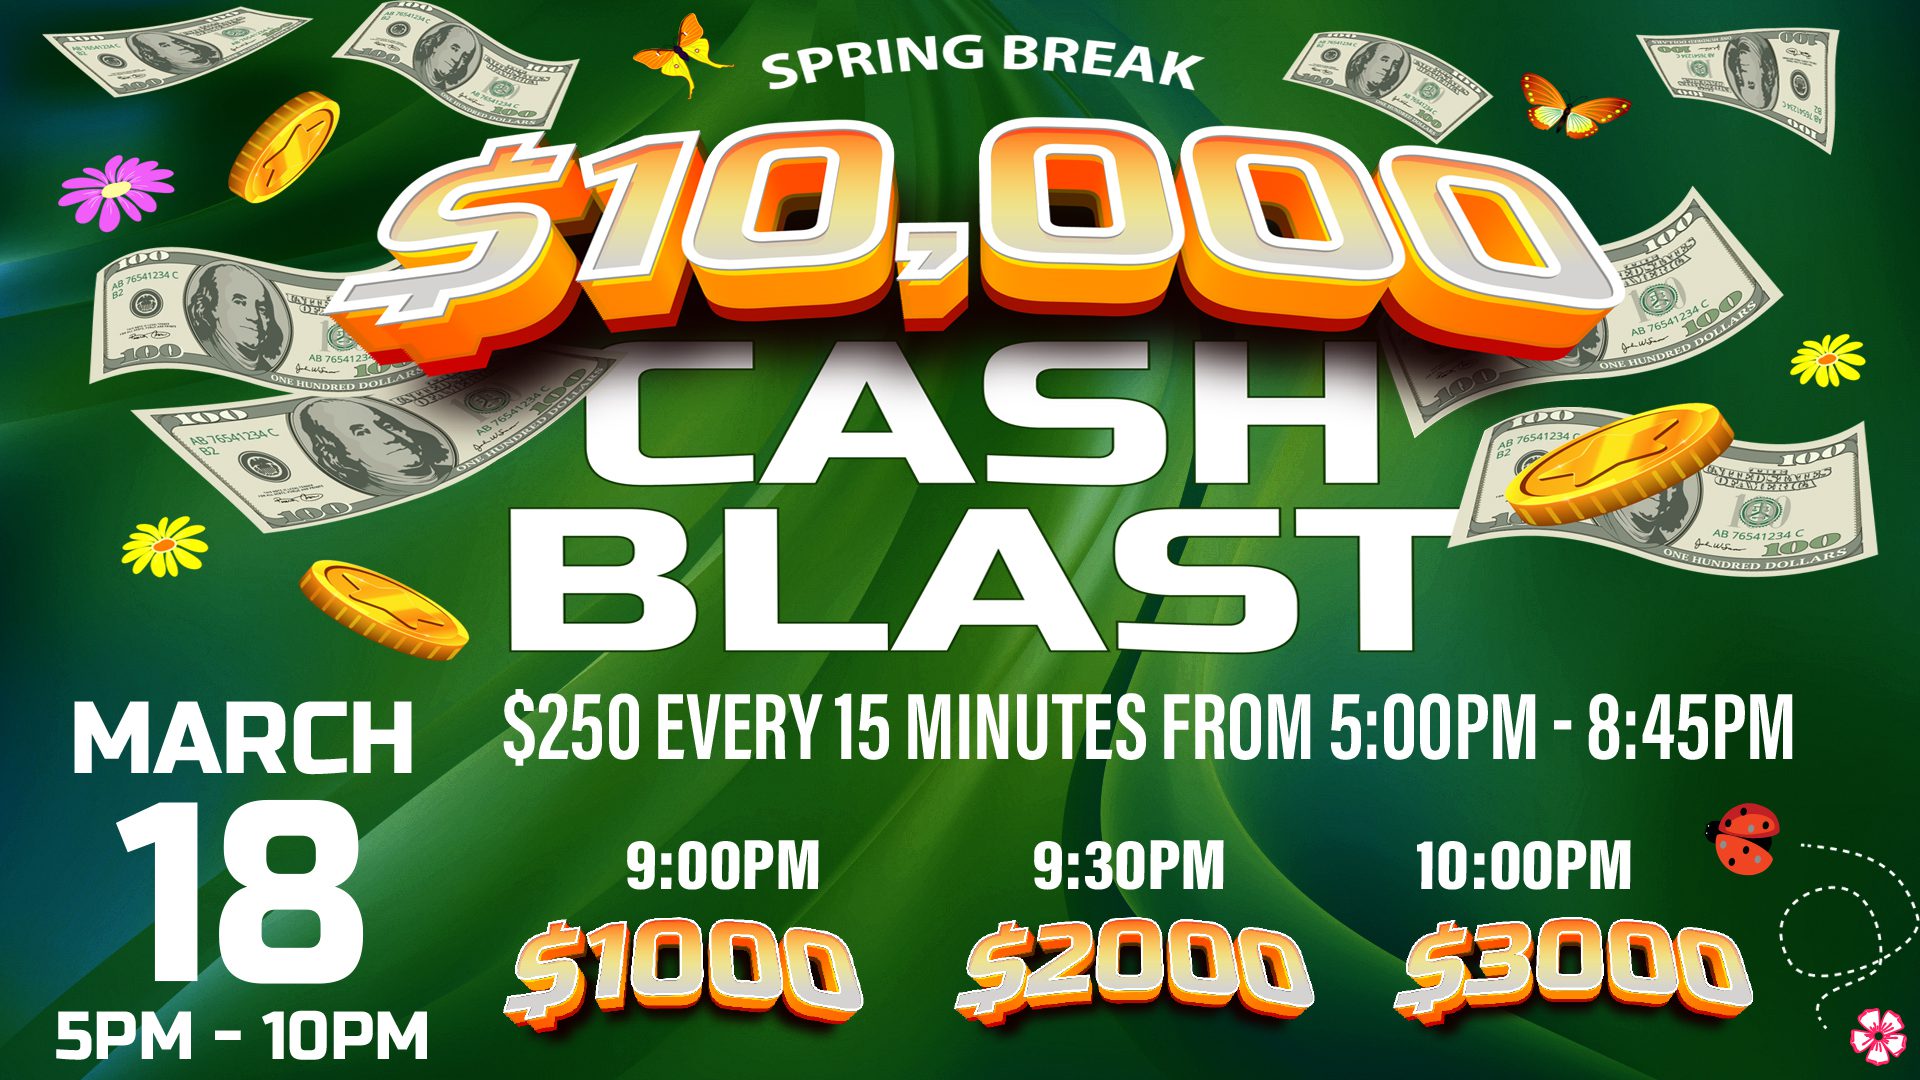 A poster with the words spring break $ 1 0, 0 0 0 cash blast.